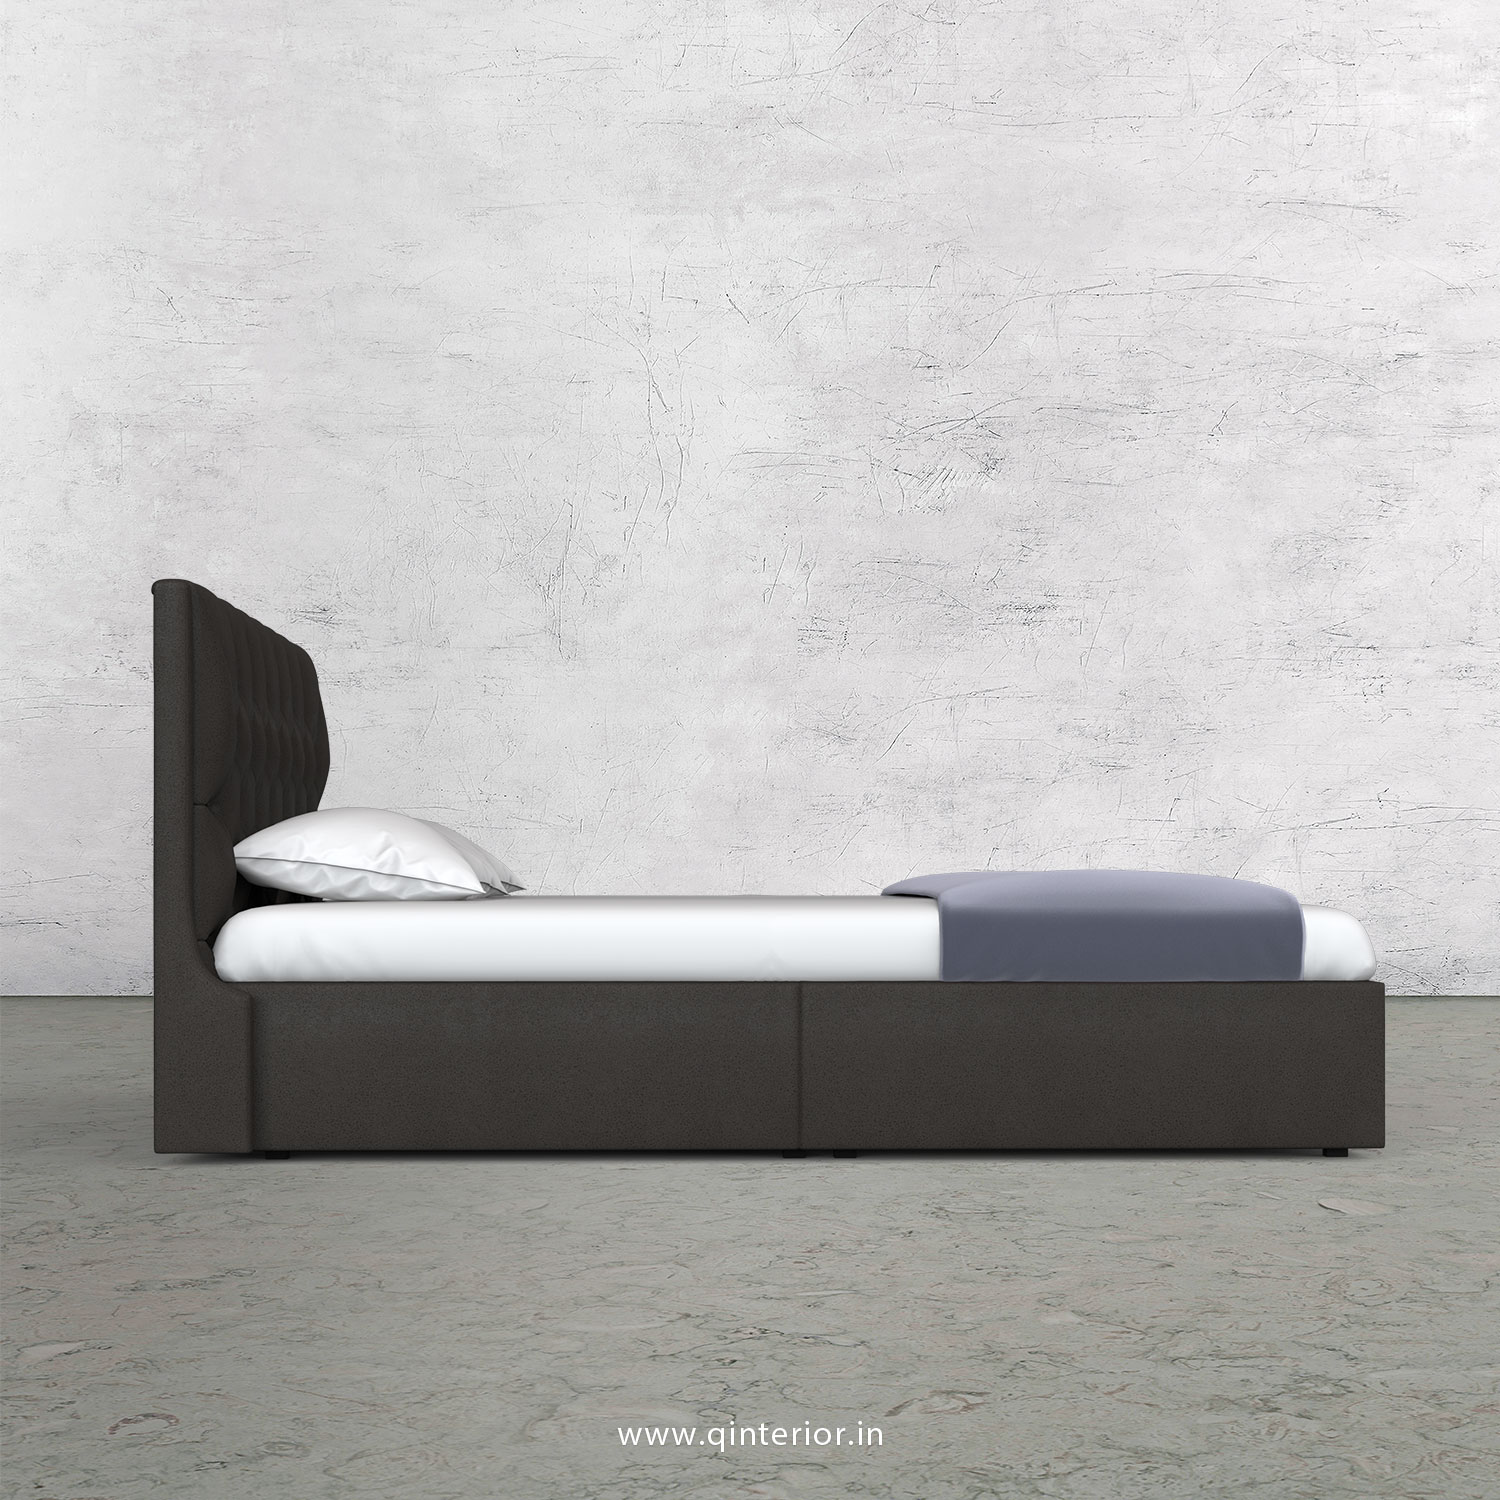 Scorpius Queen Storage Bed in Fab Leather Fabric - QBD001 FL15